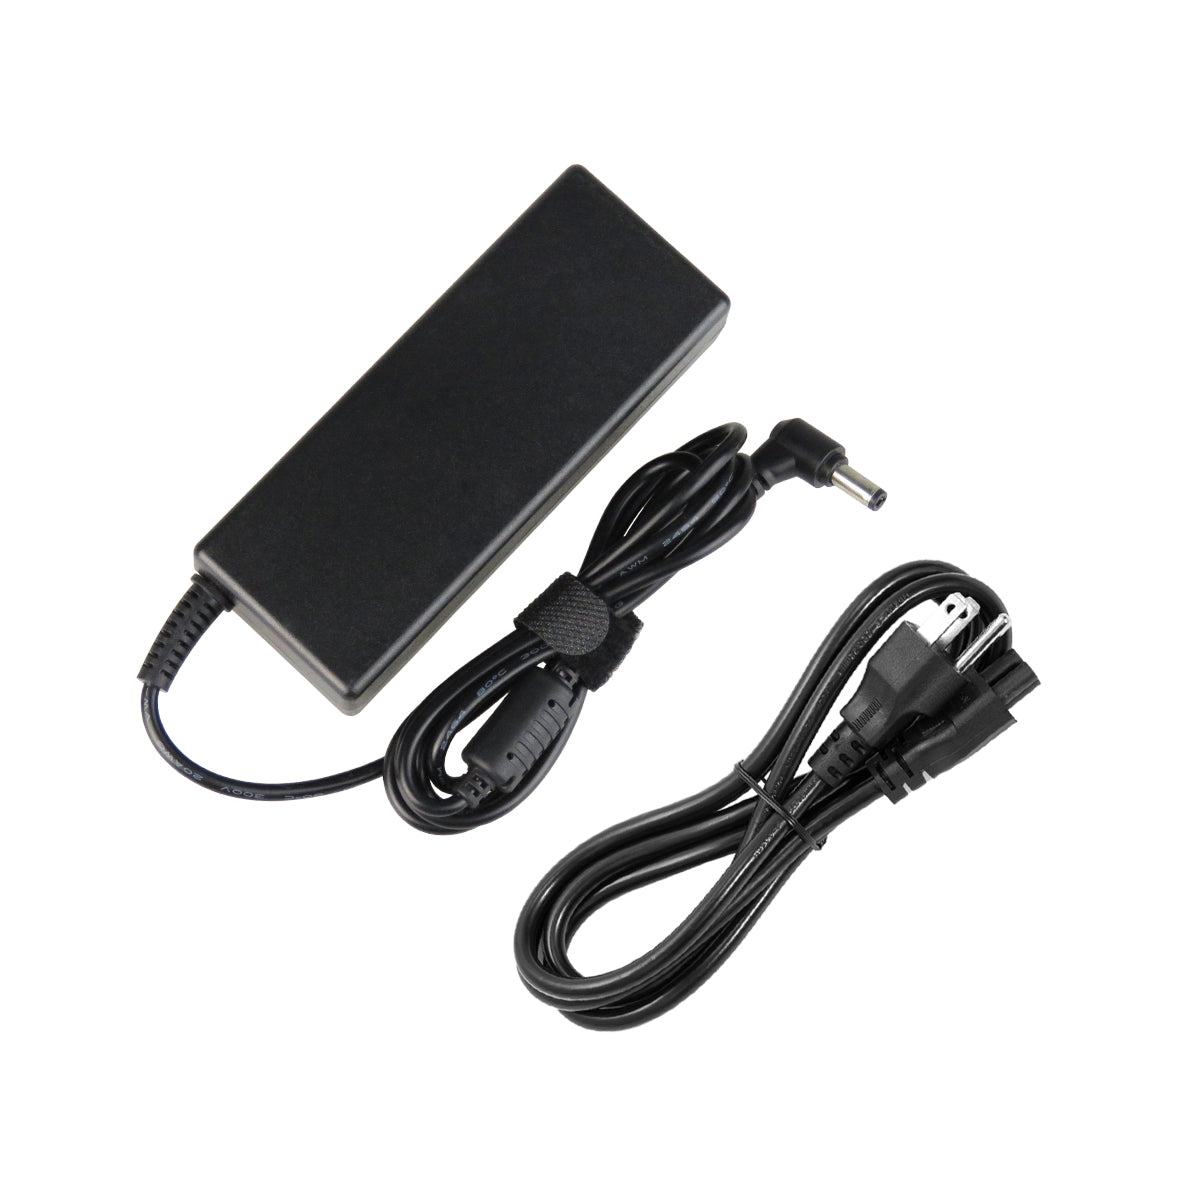 AC Adapter Charger for ASUS X54C-ES91 Notebook.